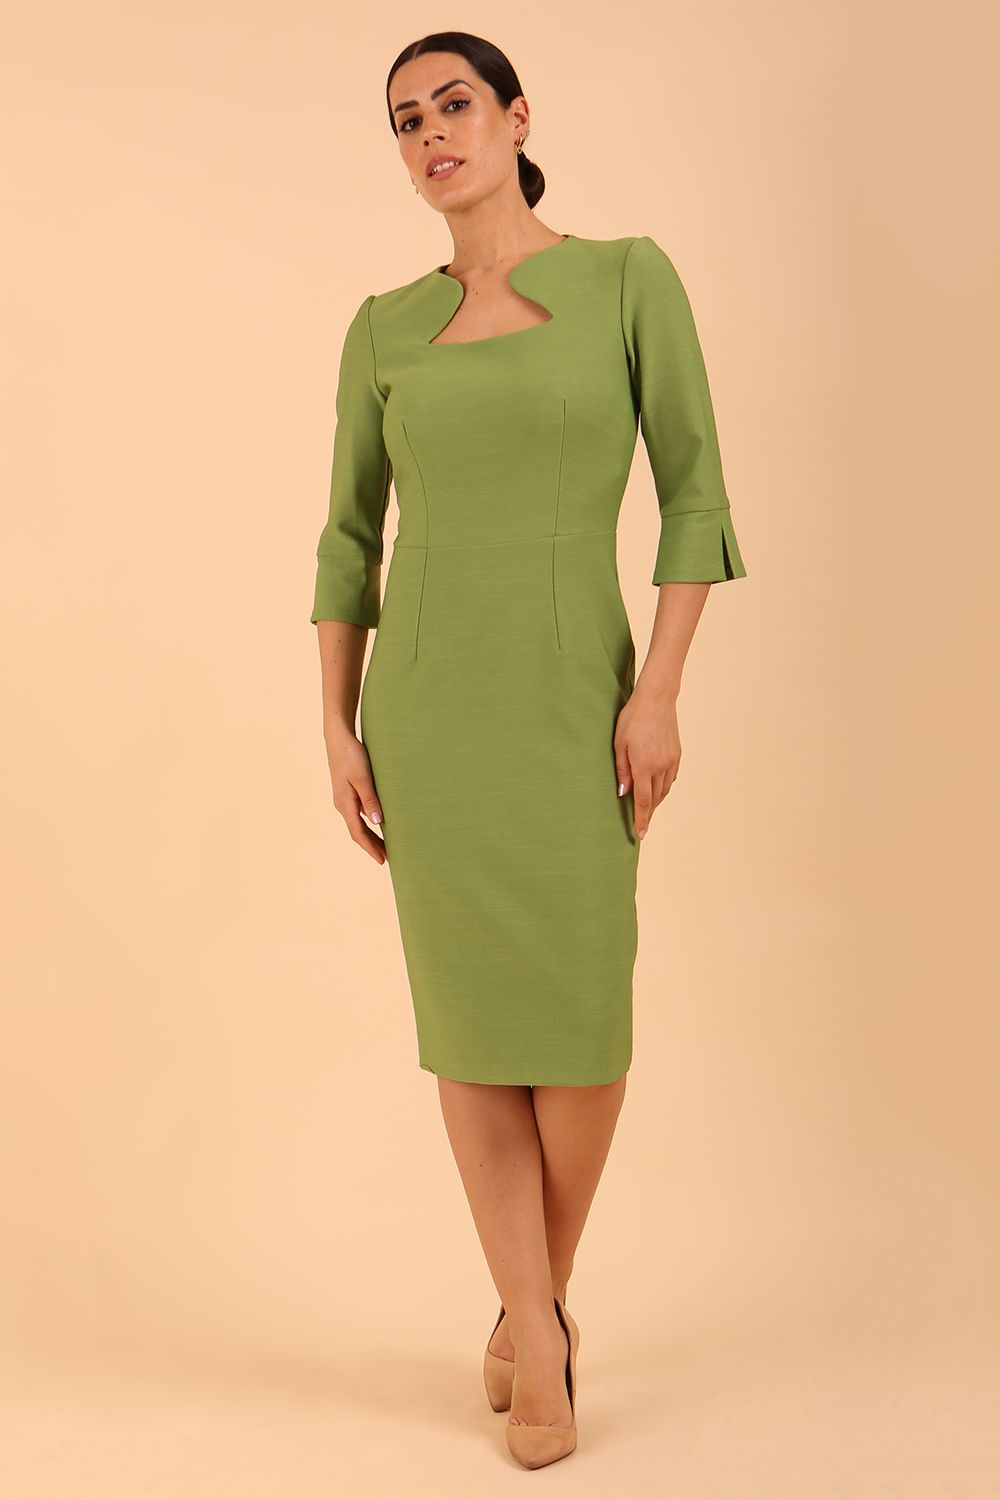 Brunette model is wearing couture stretch seed pencil bell 3/4 sleeve pencil dress by diva catwalk in Citrus Green front image